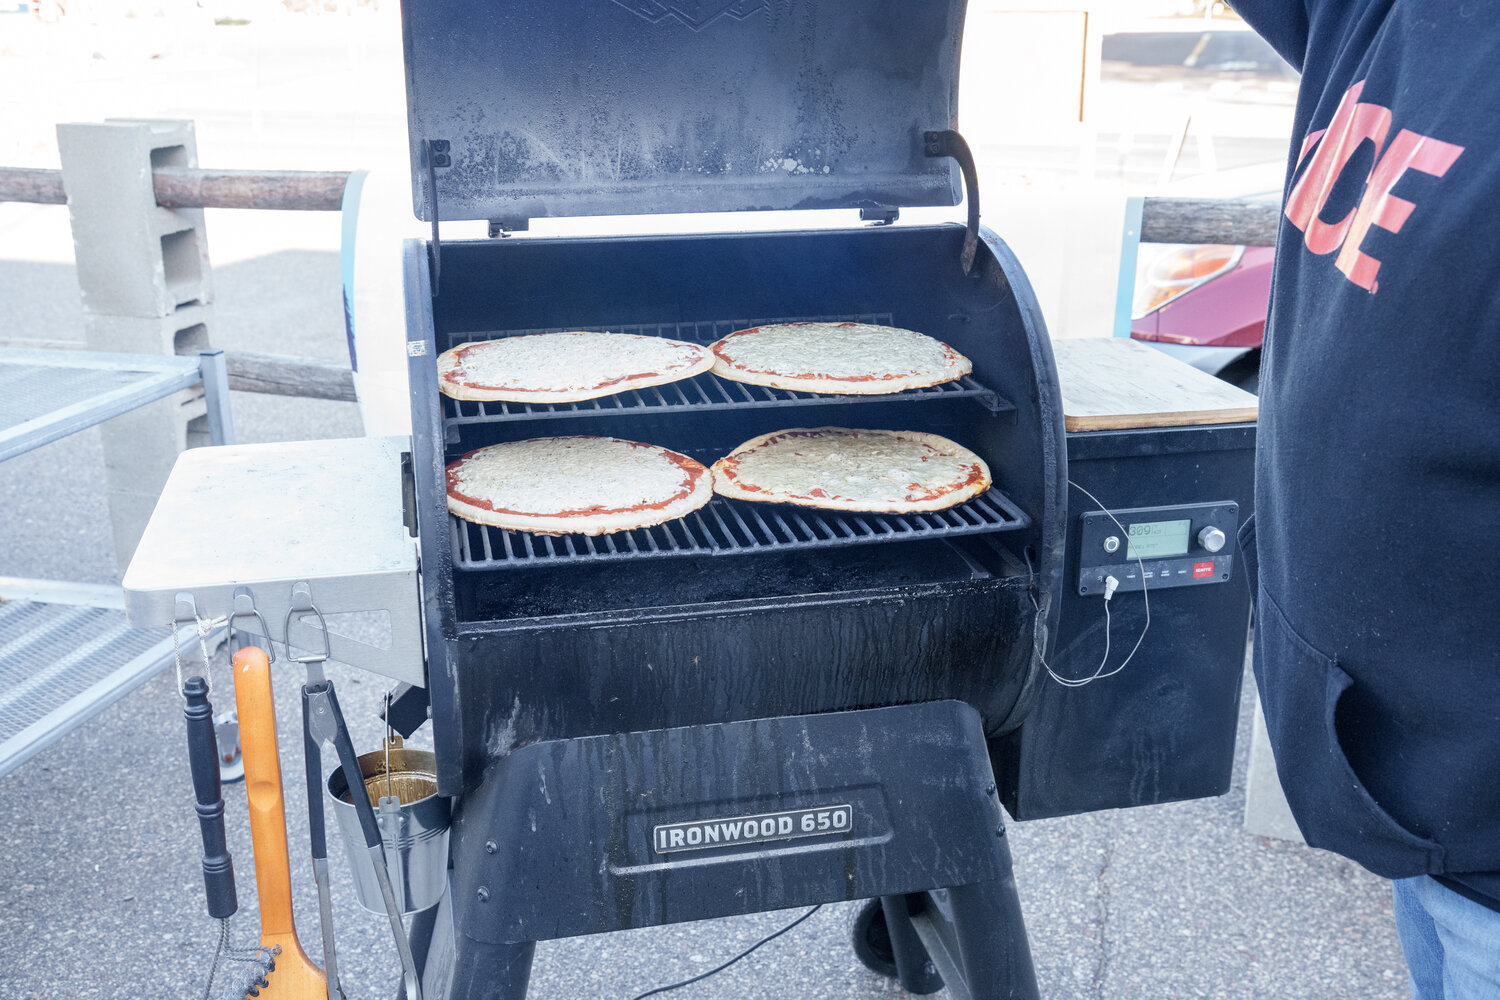 The team at Hometown Ace Hardware had some fun with their pizza giveaway event on Thanksgiving morning by cooking pizzas on their Traeger grill. The smell of the pizzas cooking was awesome. Hopefully, the taste was even better for the lucky folks that received one of the grilled pizzas.